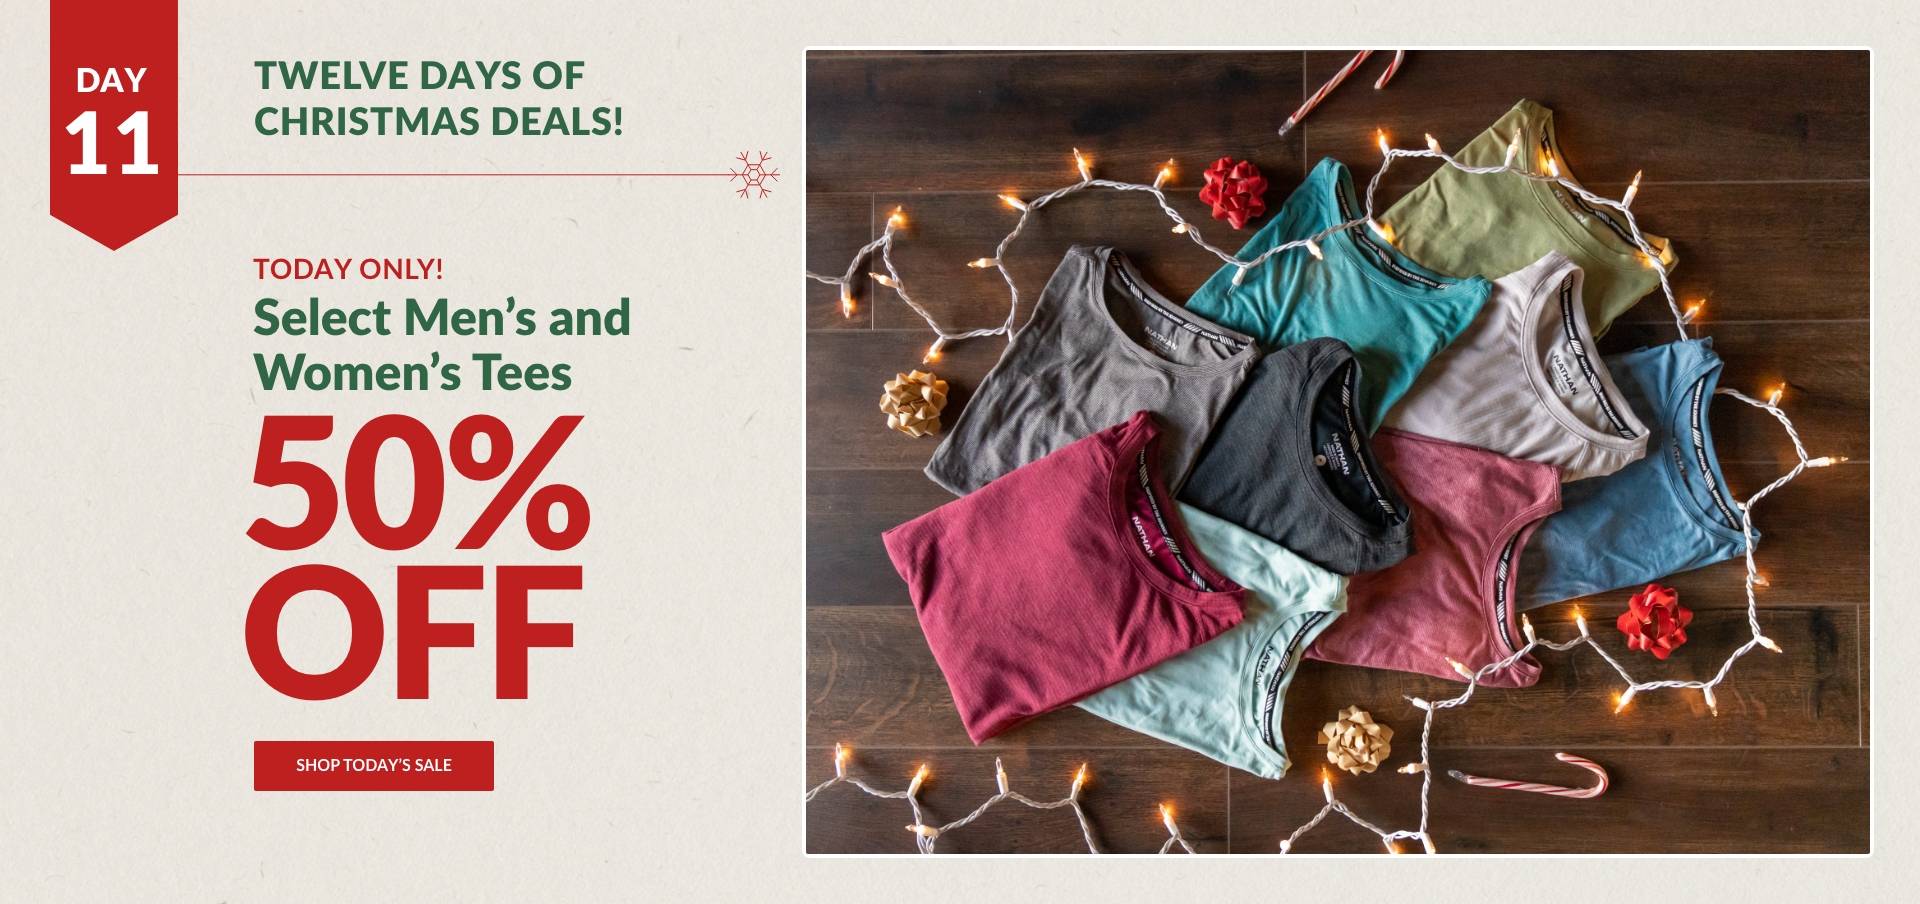 oday Only! 50% Off Select Men's & Women's Tees Shop Today's Sale